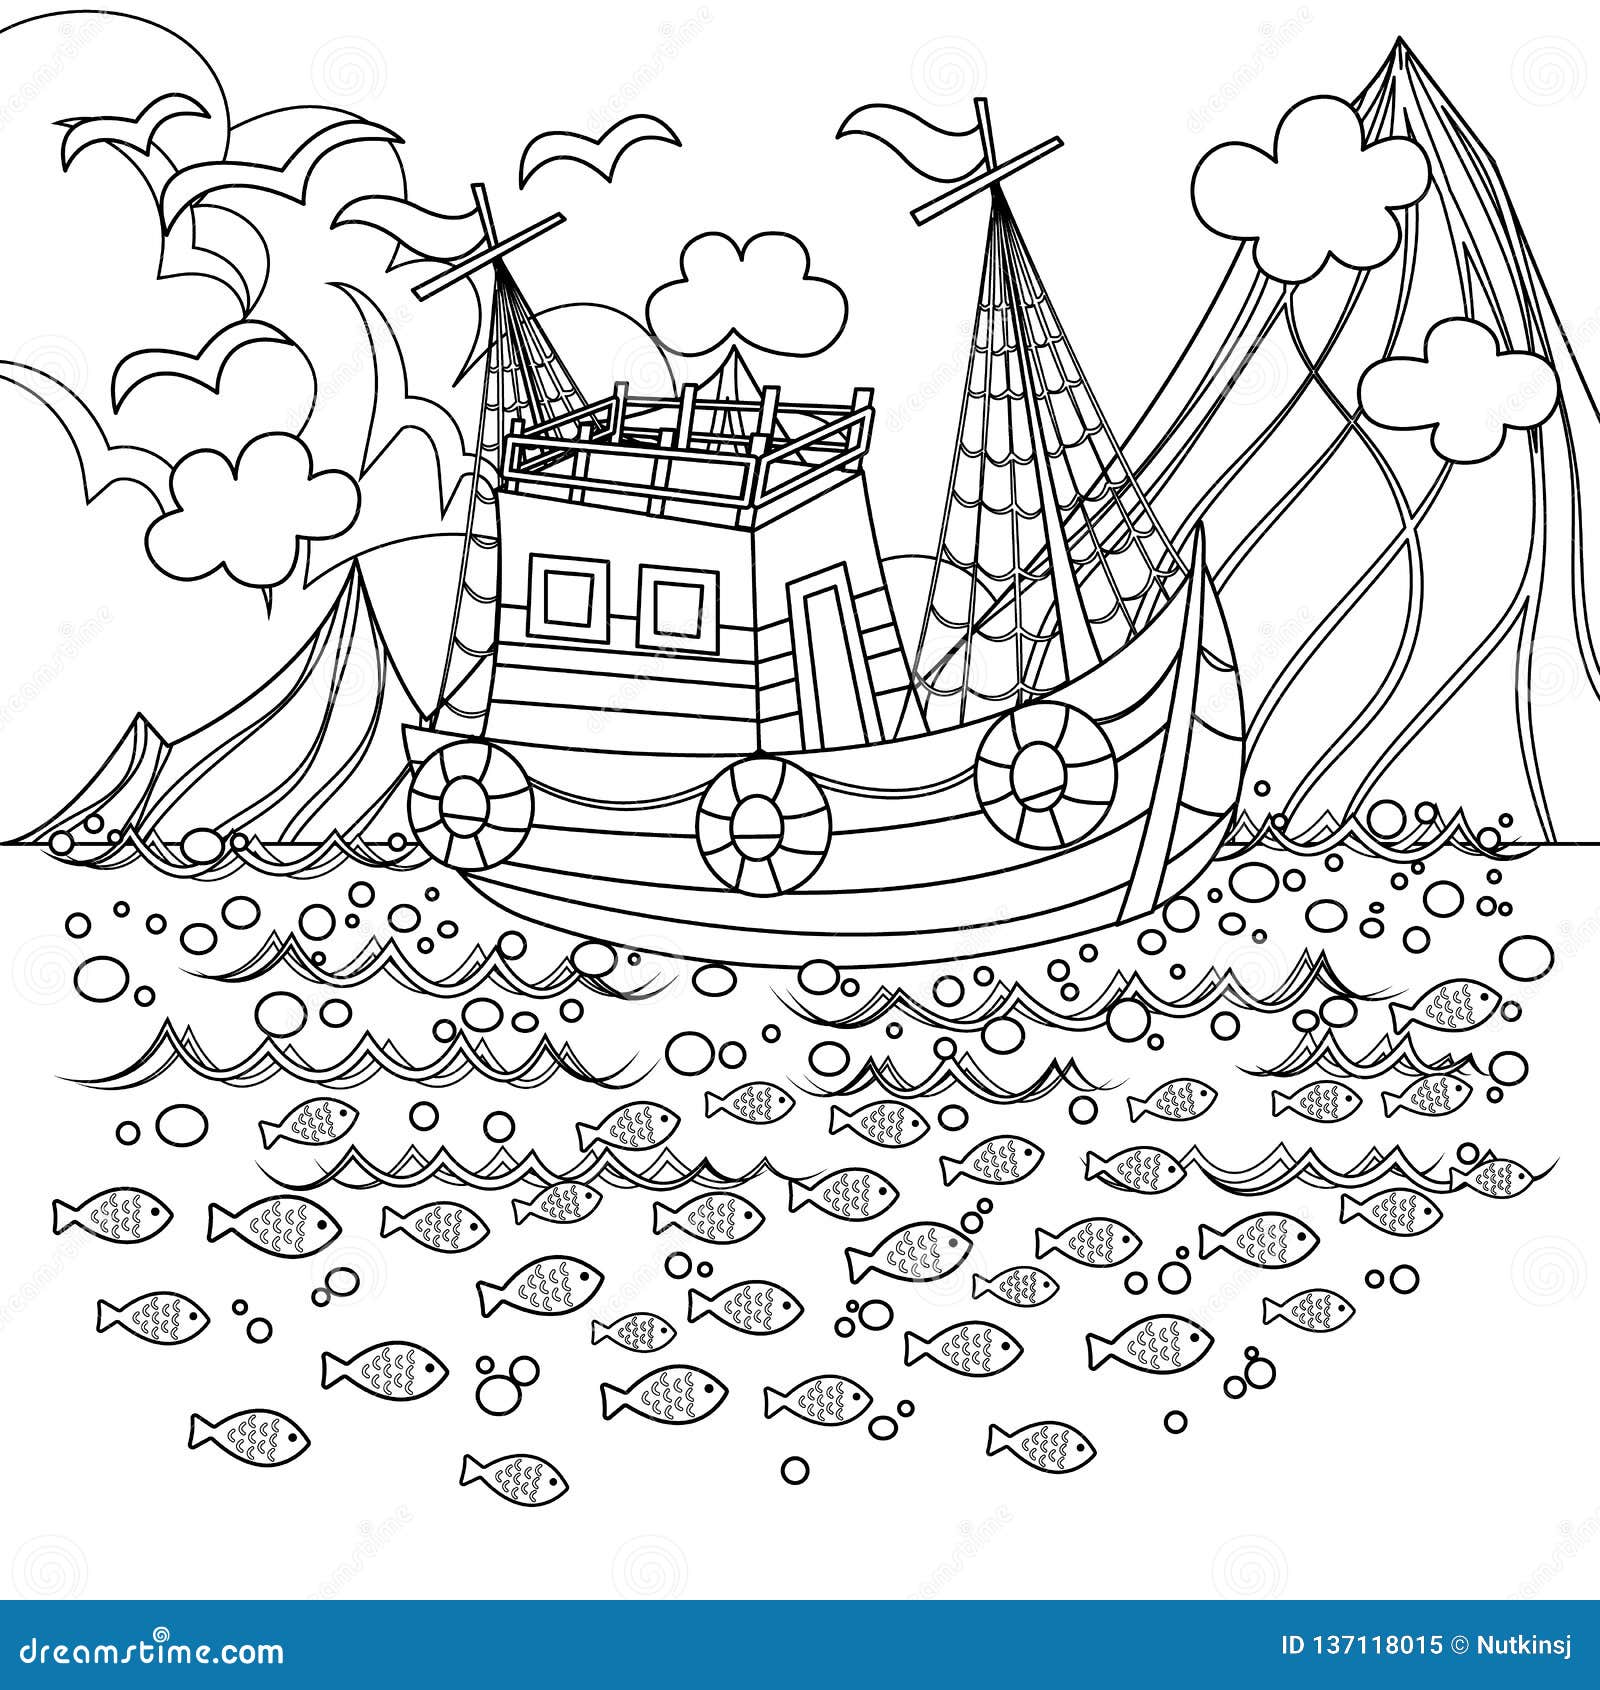 Ice fishing coloring page  Coloring pages, Fish drawings, Ice fishing